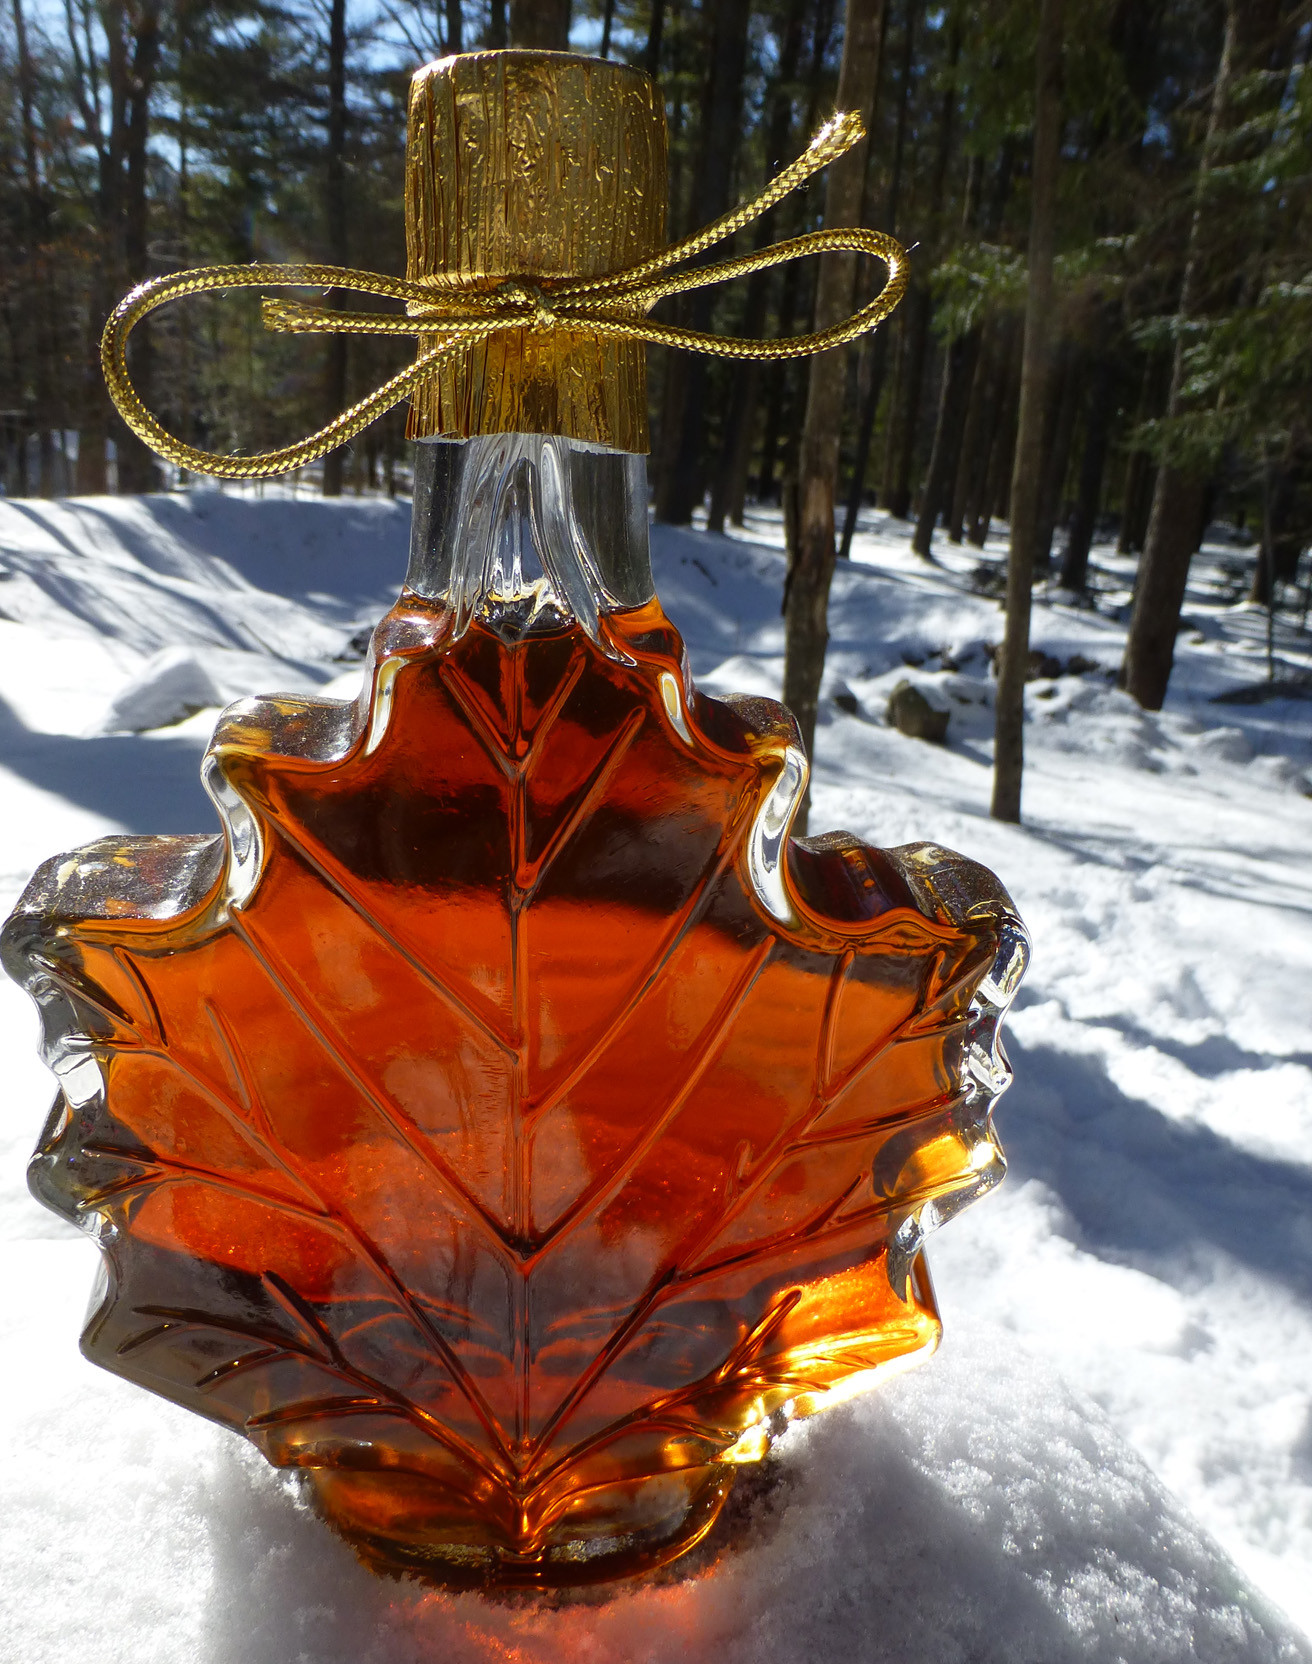 Real Adirondack maple syrup in the famous glass maple leaf jar, made from Eckert's Tree Farm!